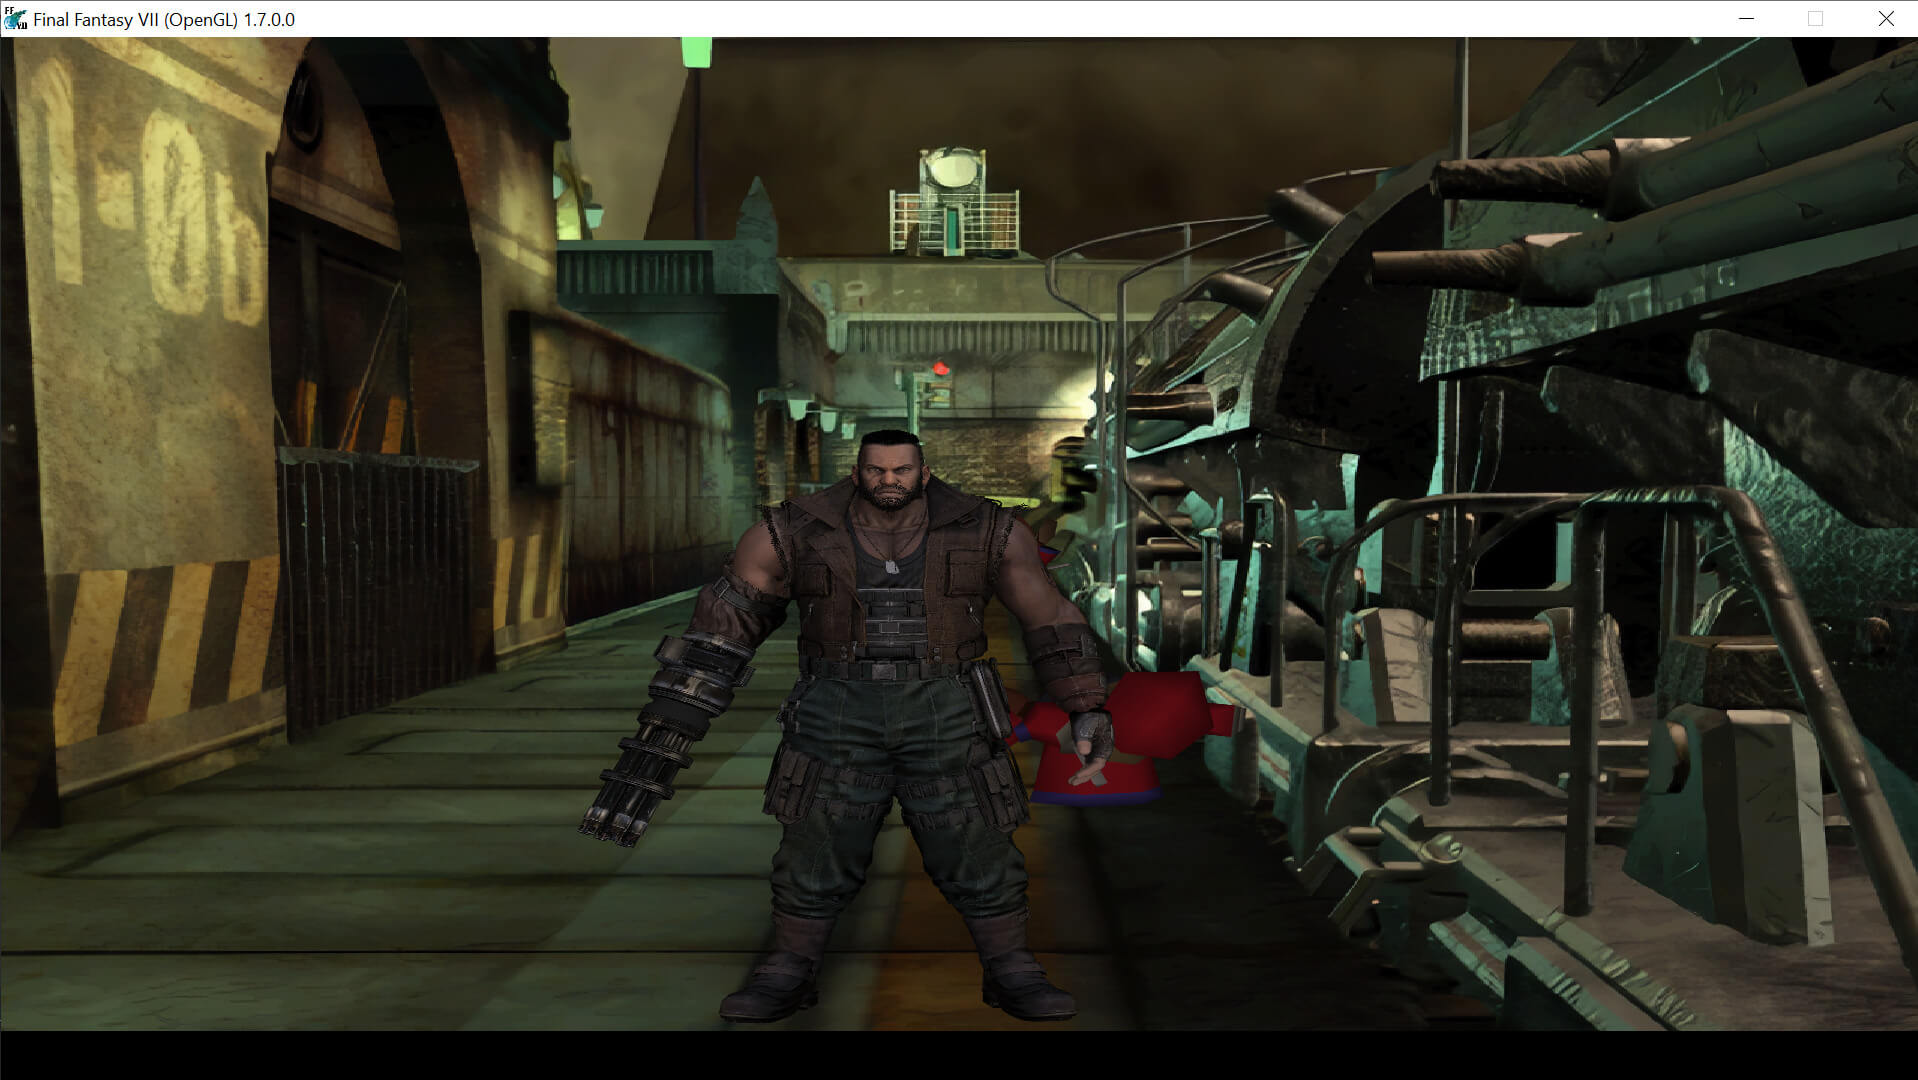  Final Fantasy 7  Mod  aims to bring the new high quality 3D 